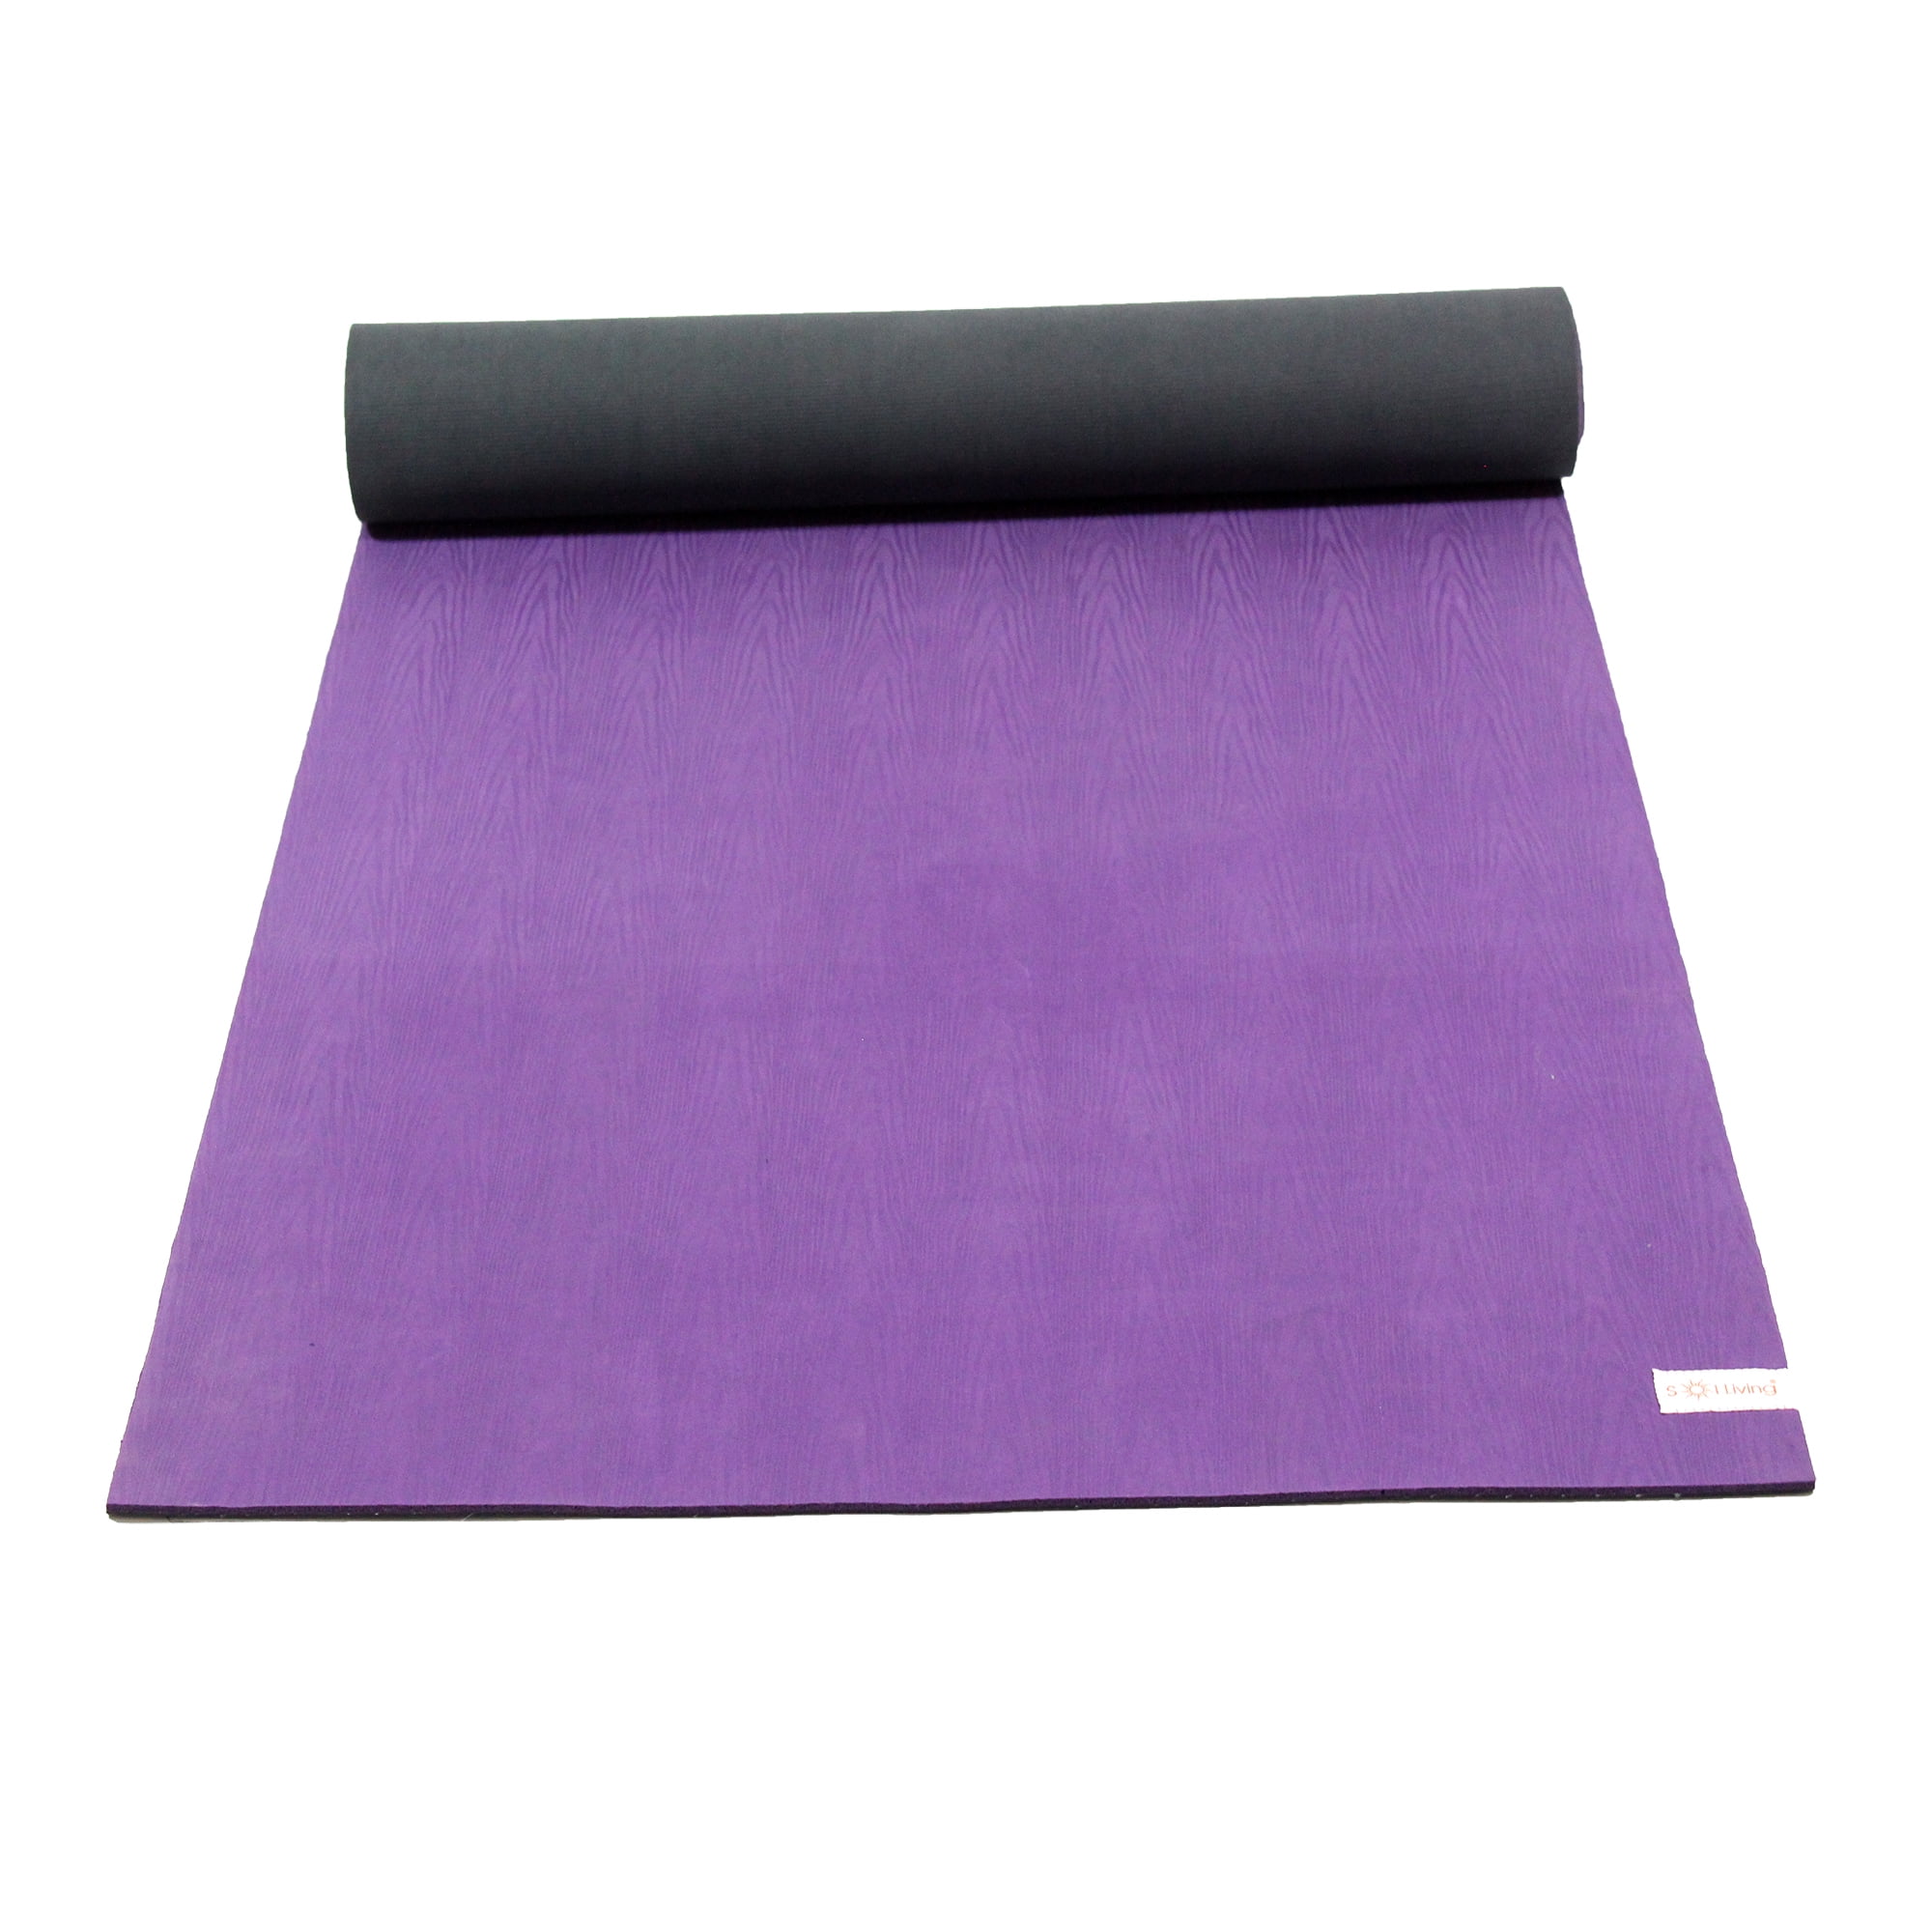 extra wide yoga mat